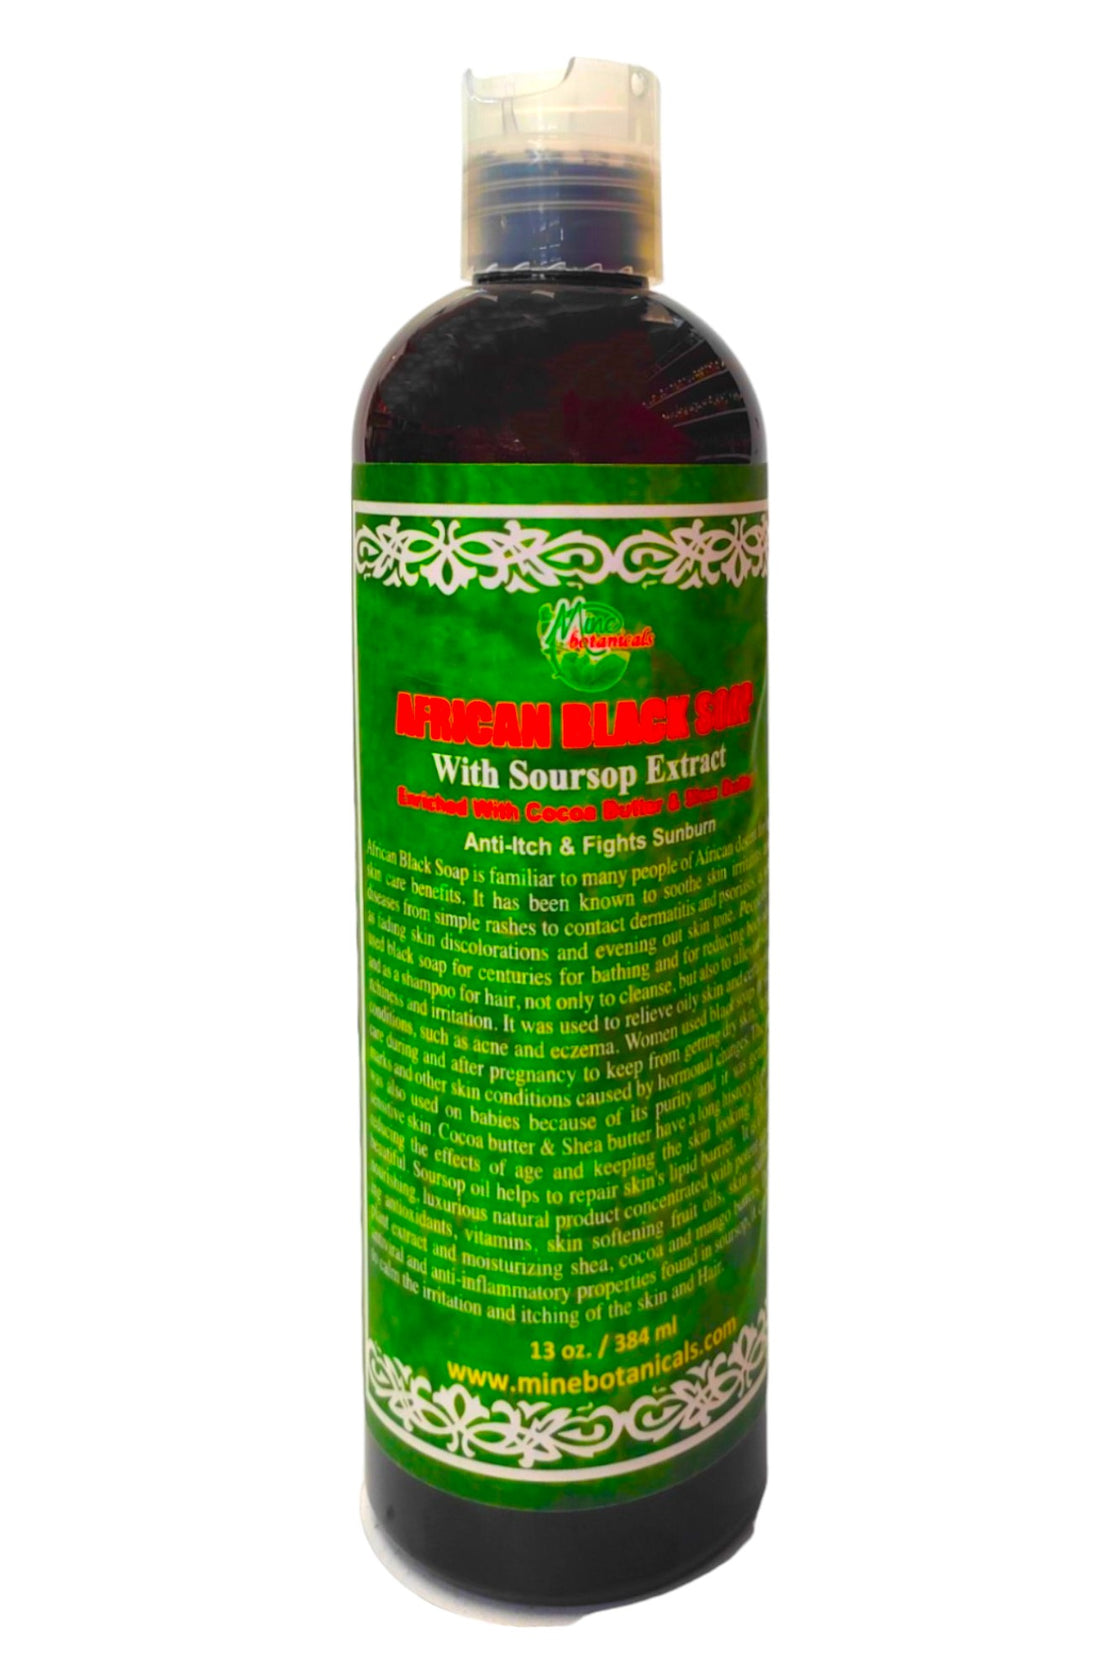 African Black soap With Soursop Extract